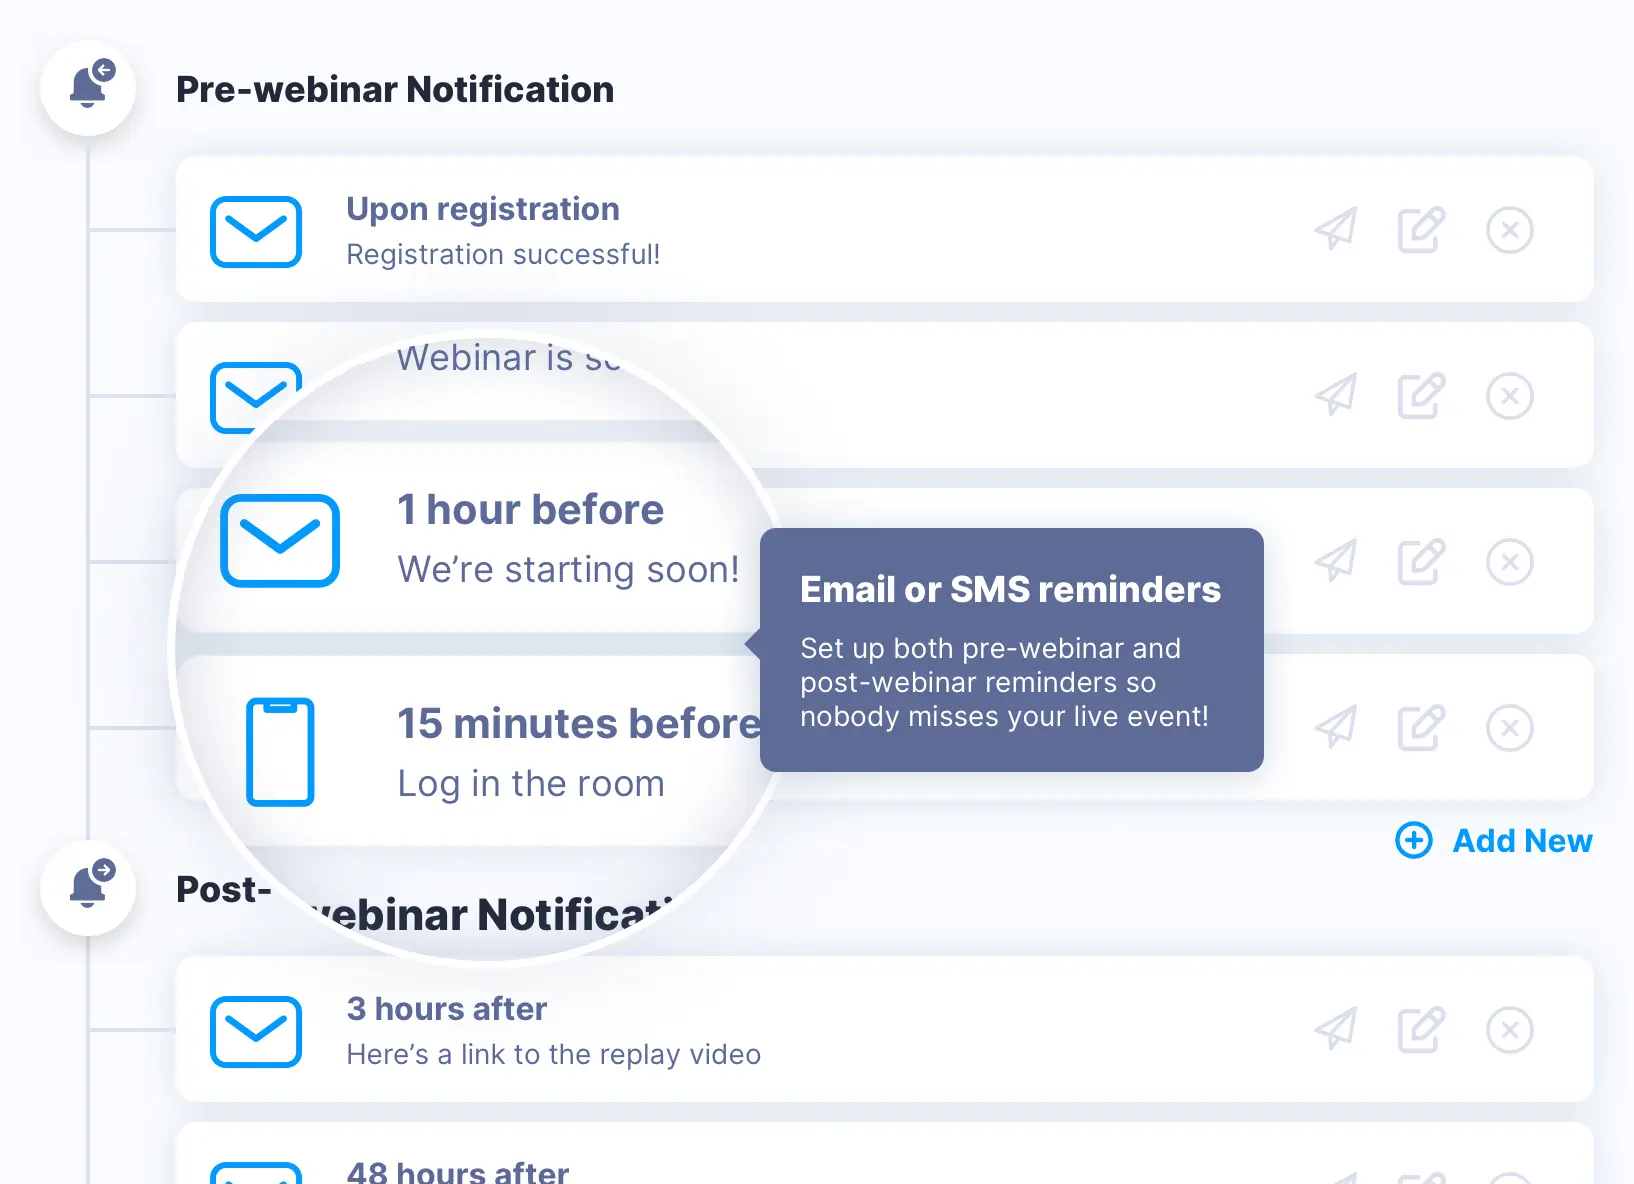 Full Email & SMS System - Keep your subscribers in the loop.